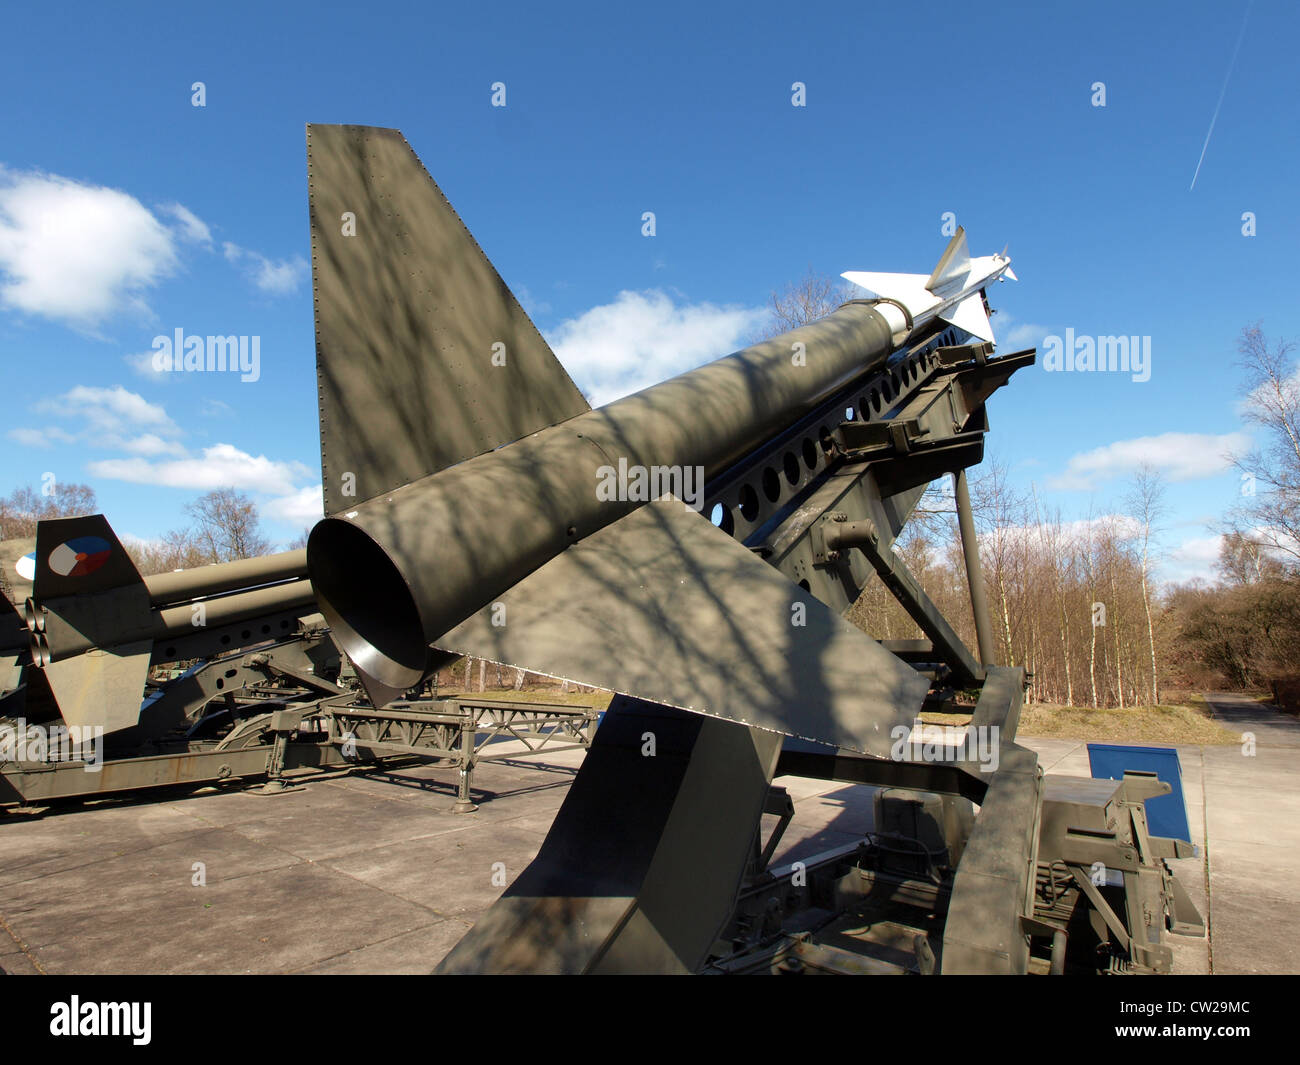 Air to Air rocket at the luchtvaart museum Soesterberg Stock Photo